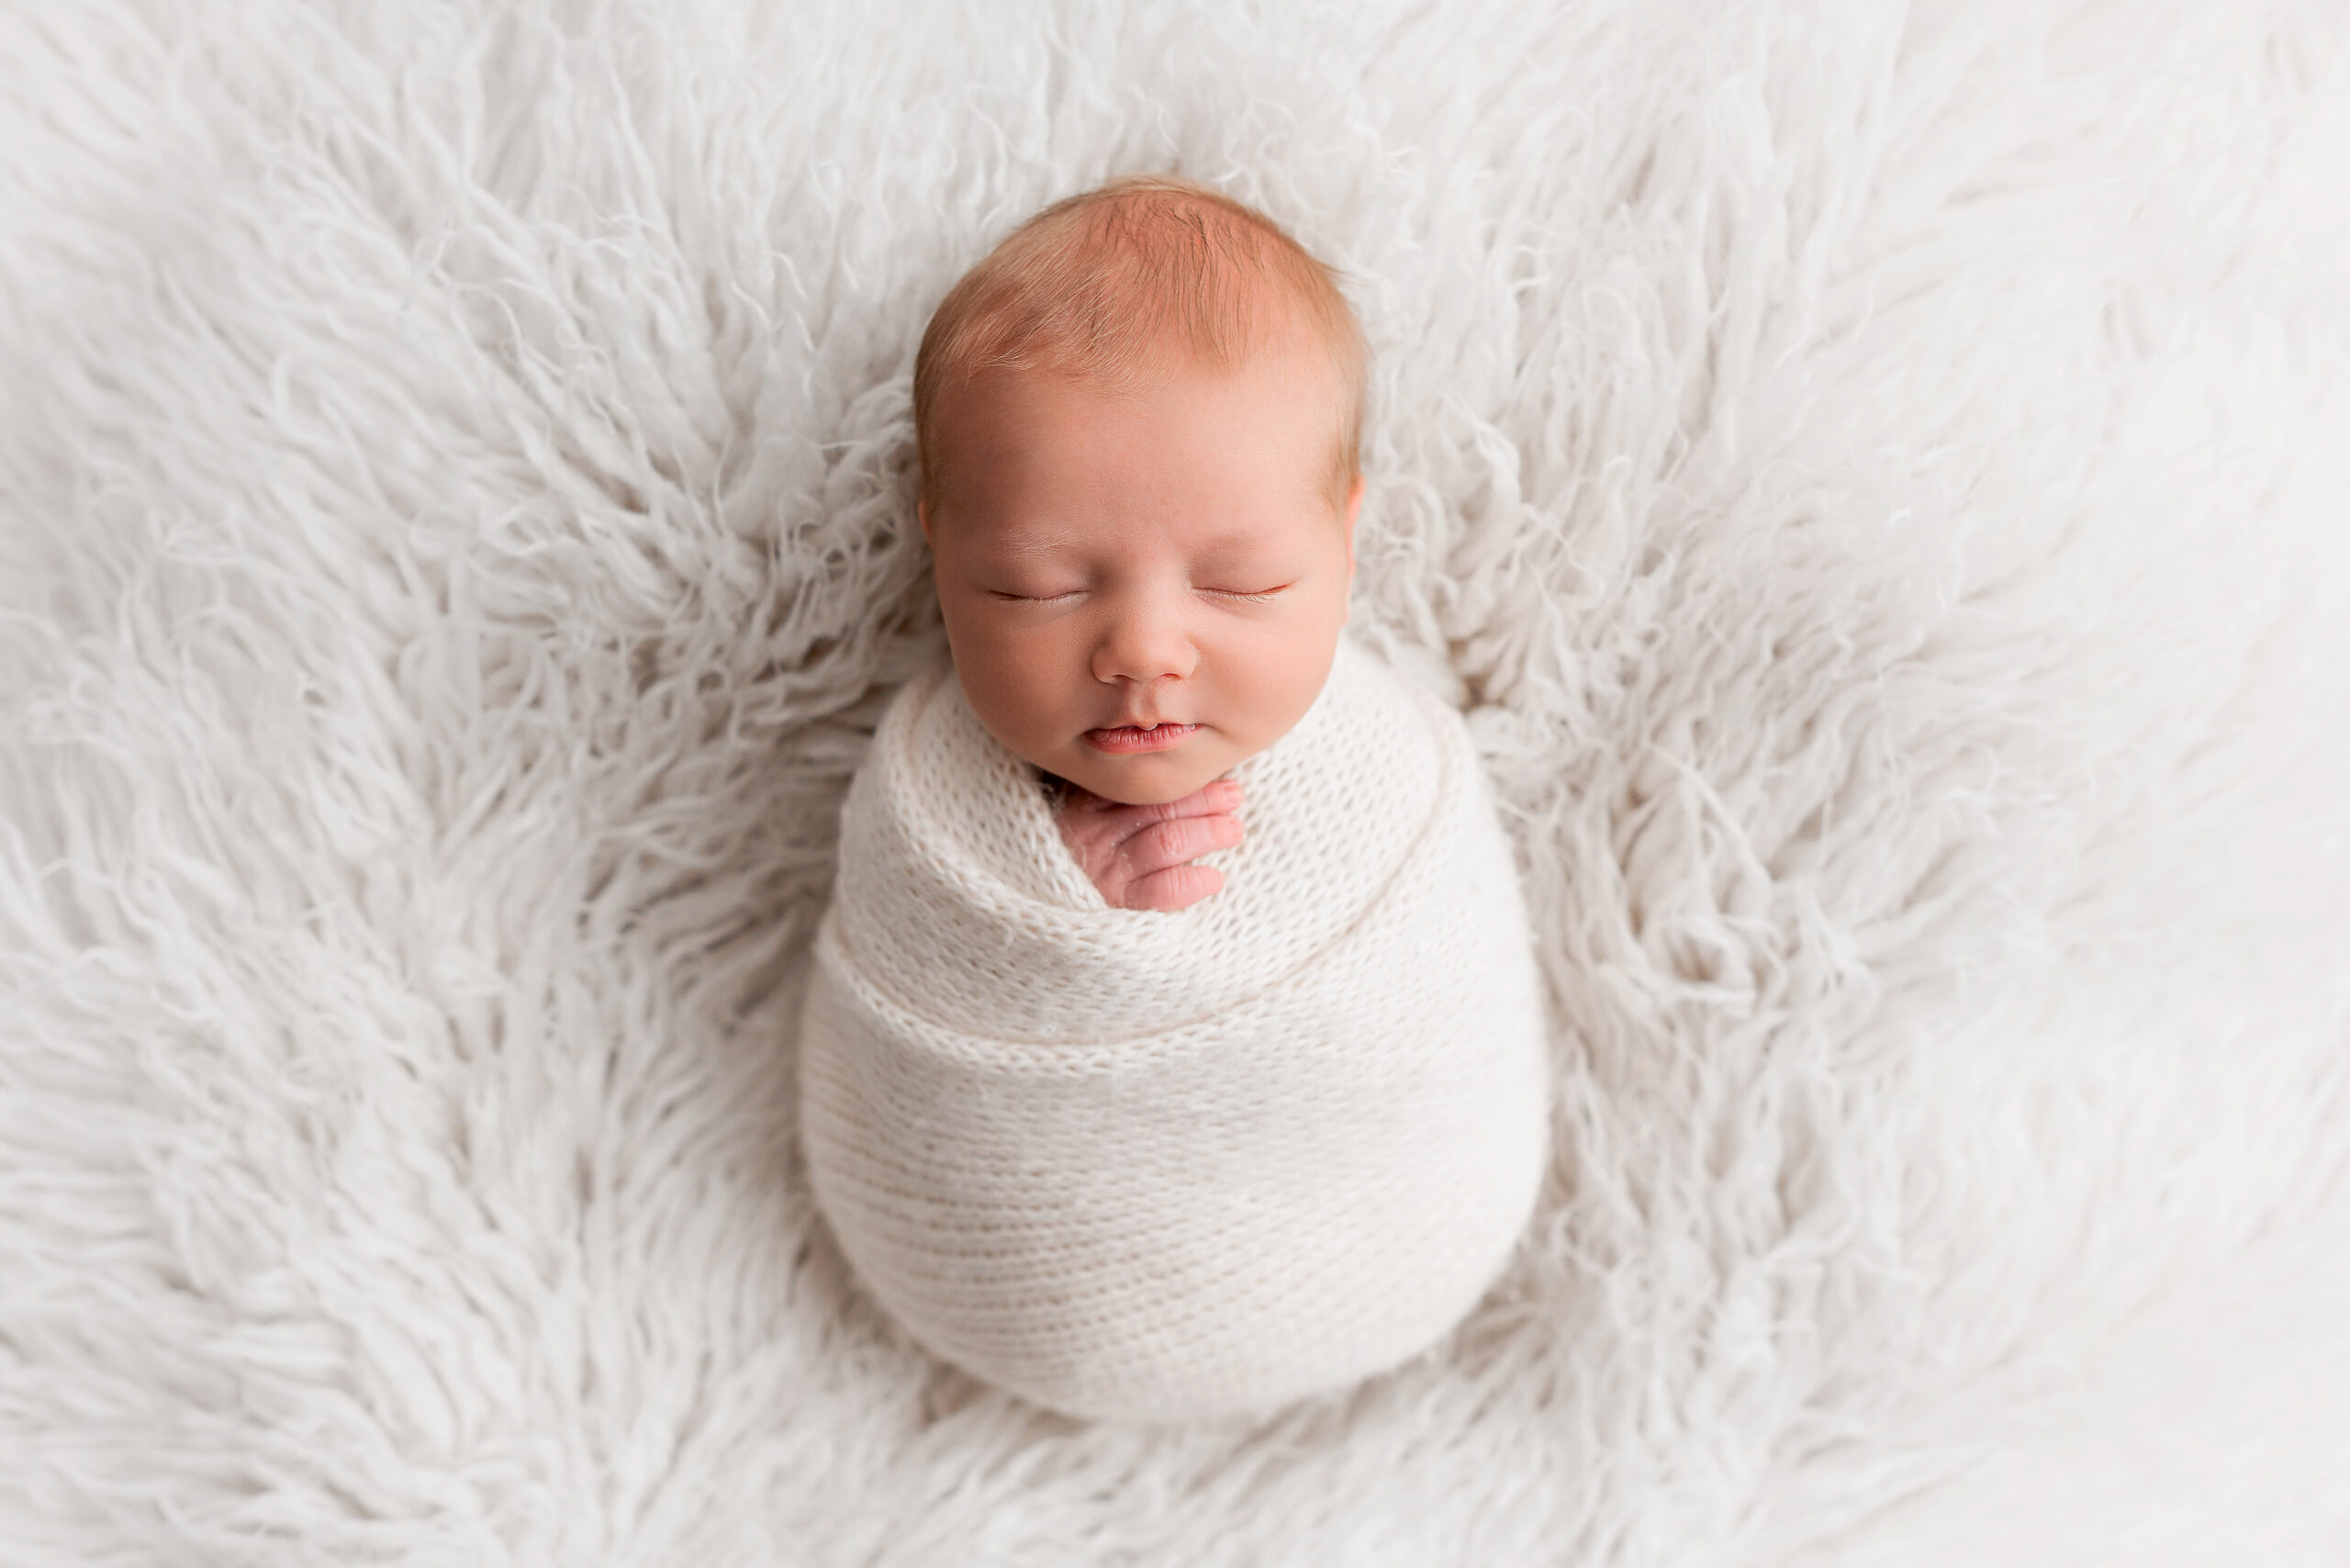 Newborn Photography Barnsley, newborn baby swaddled in a cream knitted blanket laid sleeping on a fluffy cream background.